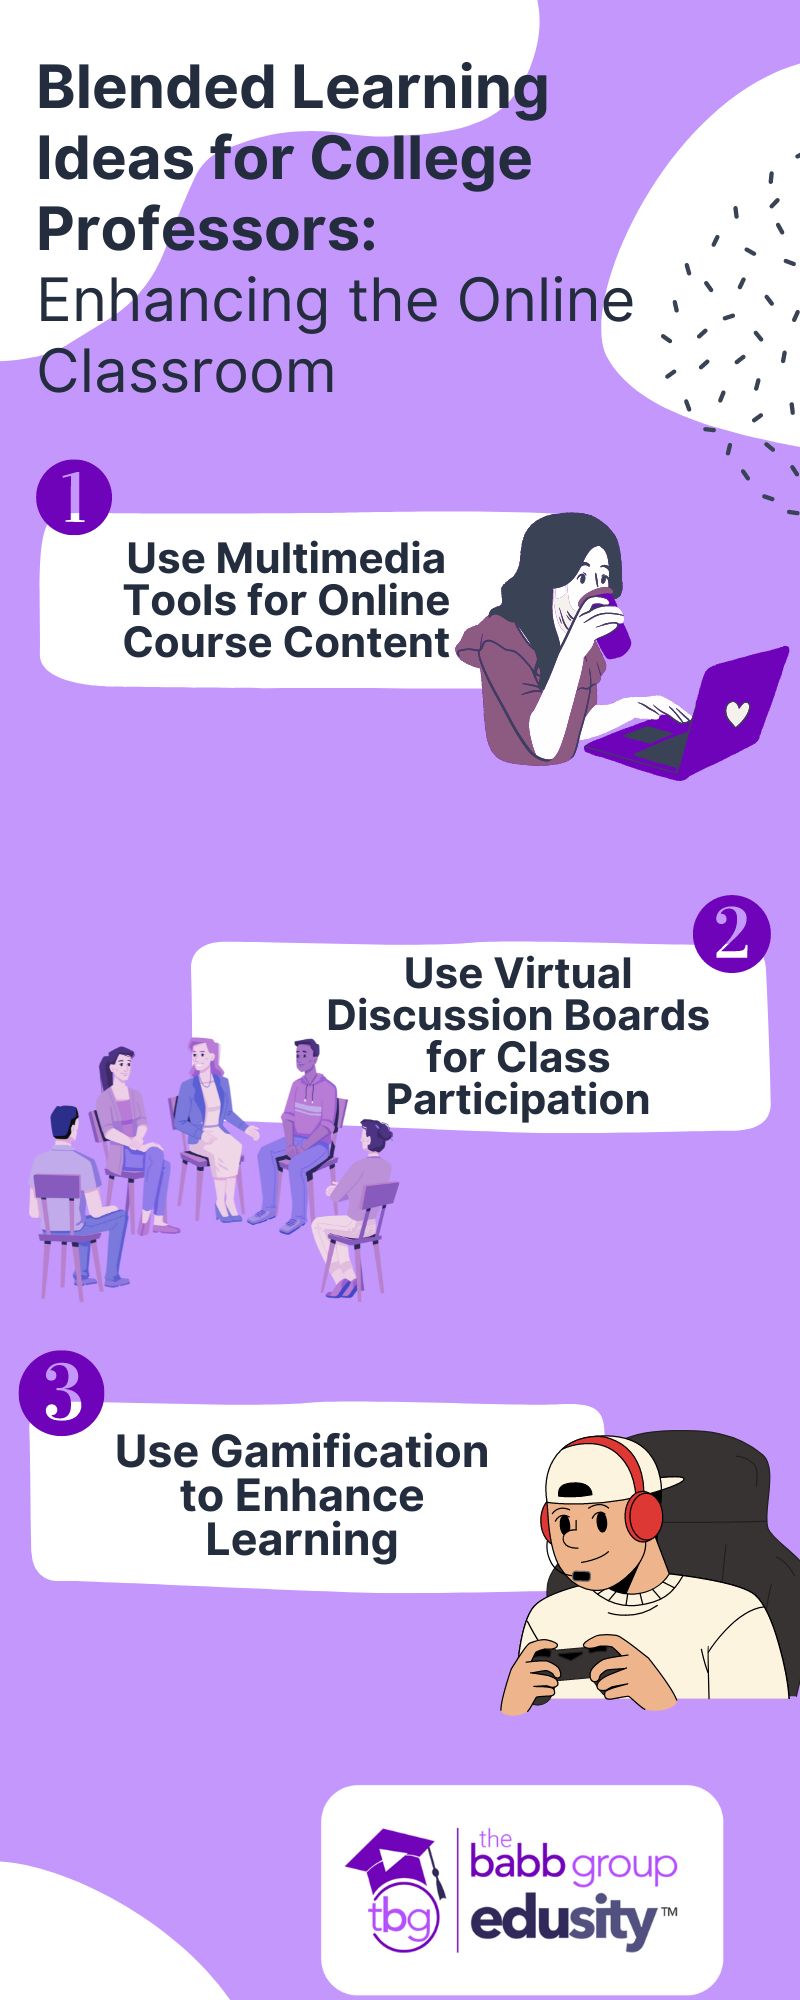 Blended learning ideas for college professors: enhancing the online classroom. Use Multimedia Tools for Online Course Content Use virtual discussion boards for class participation Use gamification to enhance learning